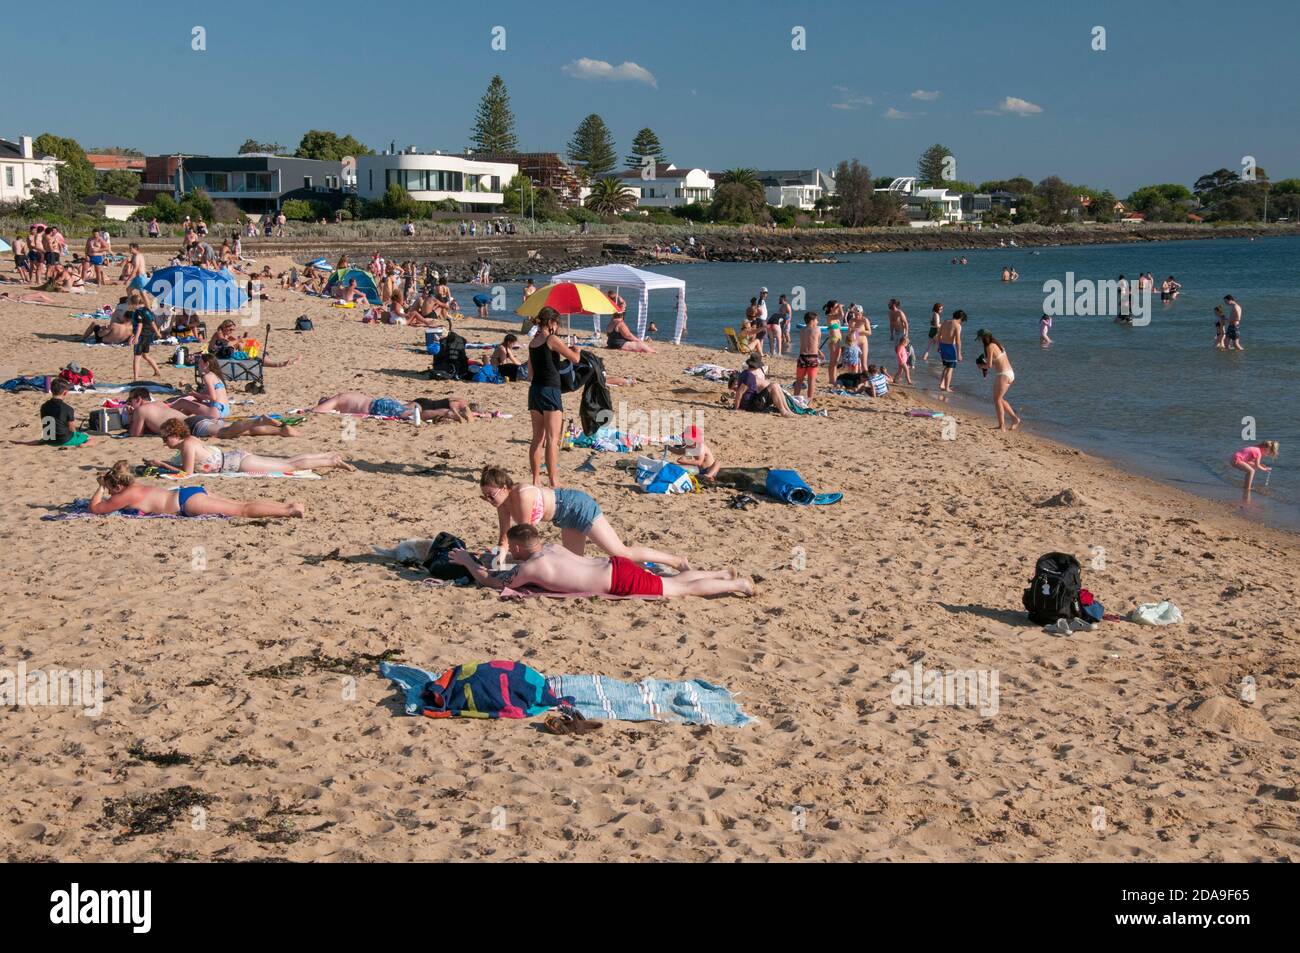 Residents crowd onto Elwood Beach on the first hot day after the lifting of strict COViD-19 lockdown restrictions in Melbourne, Victoria, Australia Stock Photo